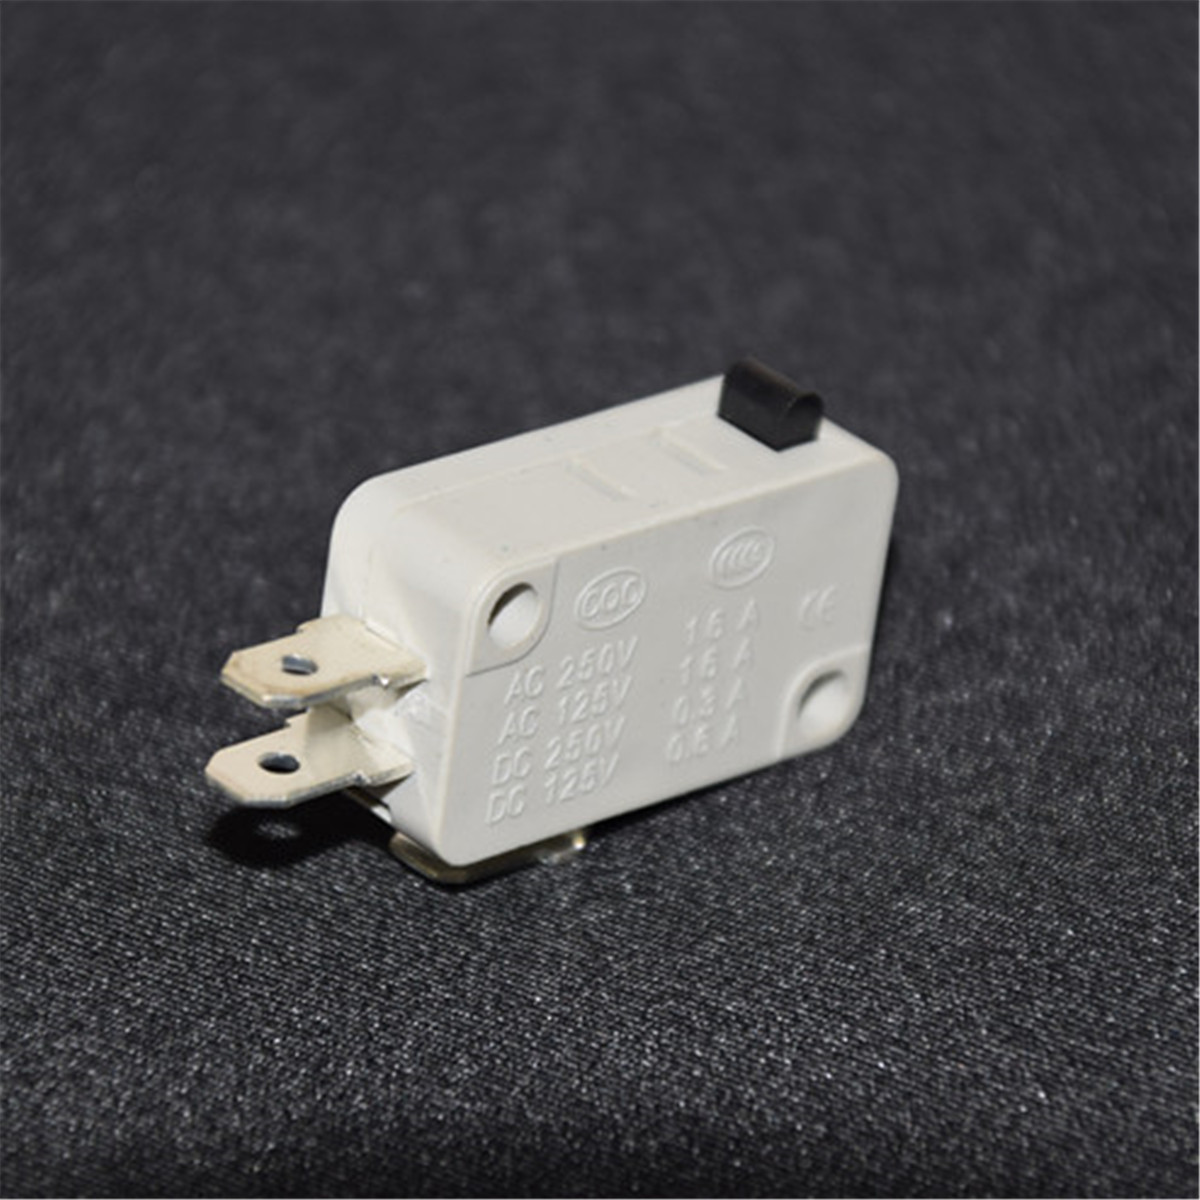 2Pcs KW3A Microwave Oven Door Micro Switch 16A 125V//250V Normally Open Switch